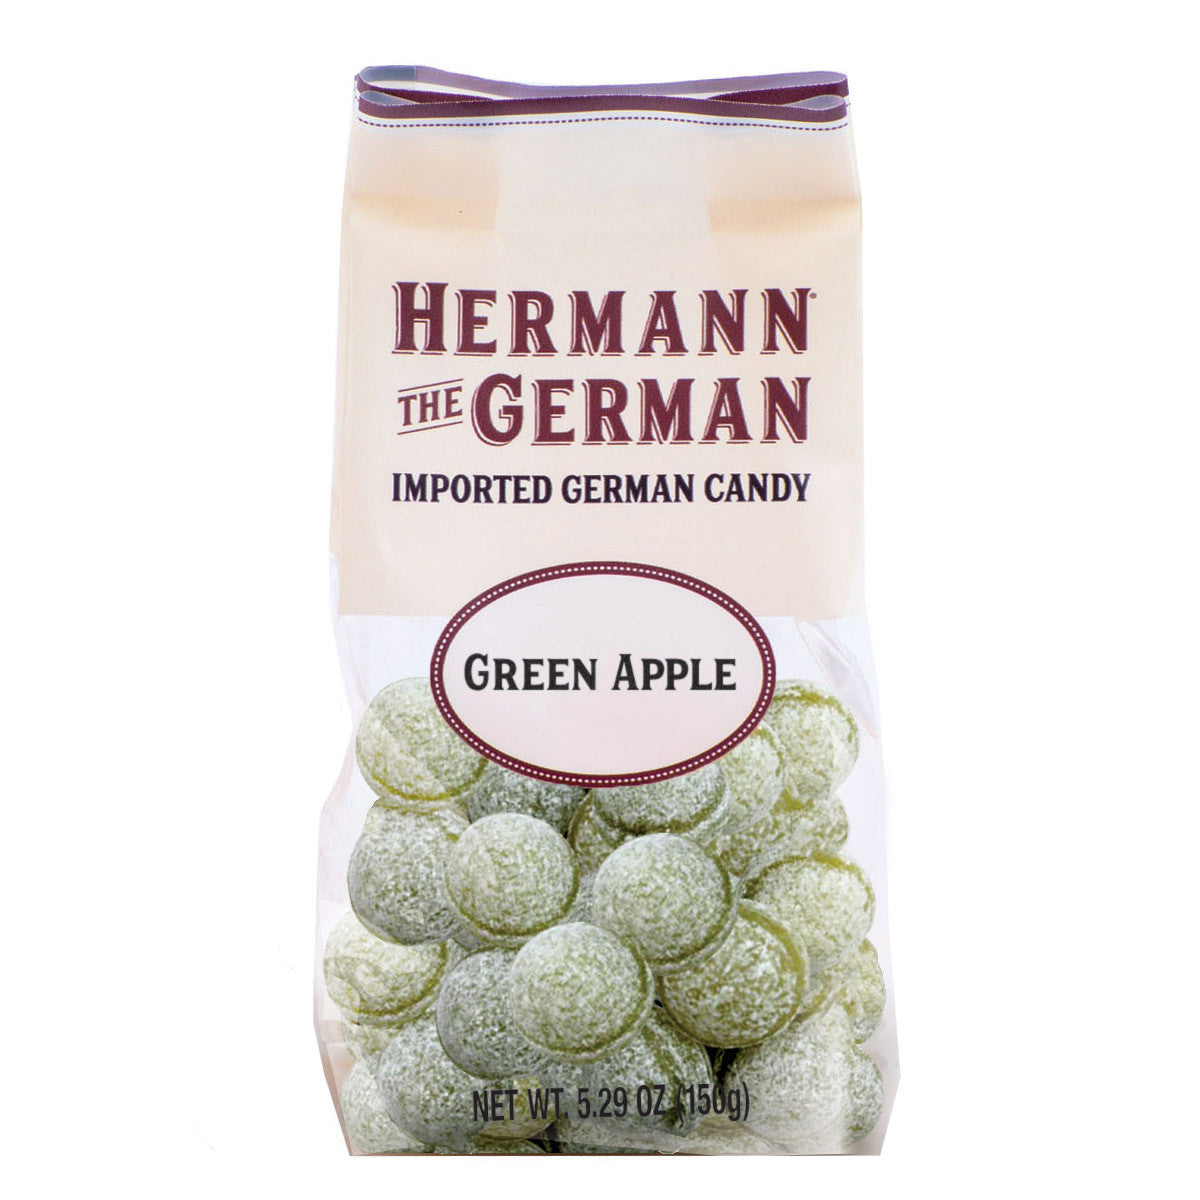 Hermann The German® Imported German Candy